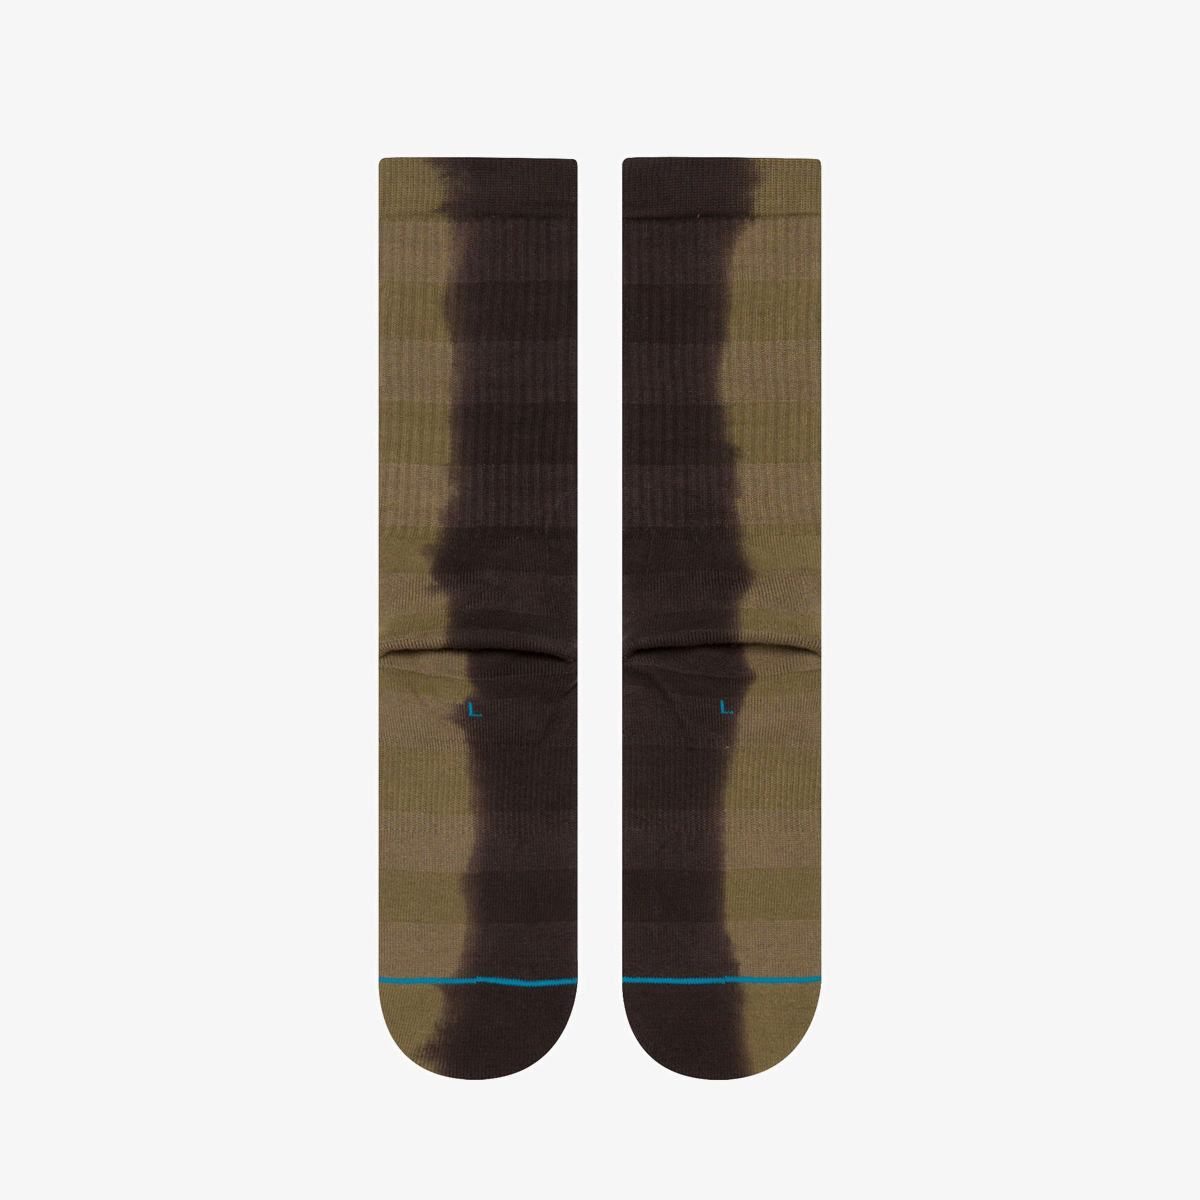 Носки Stance GET SHACKED OLIVE M